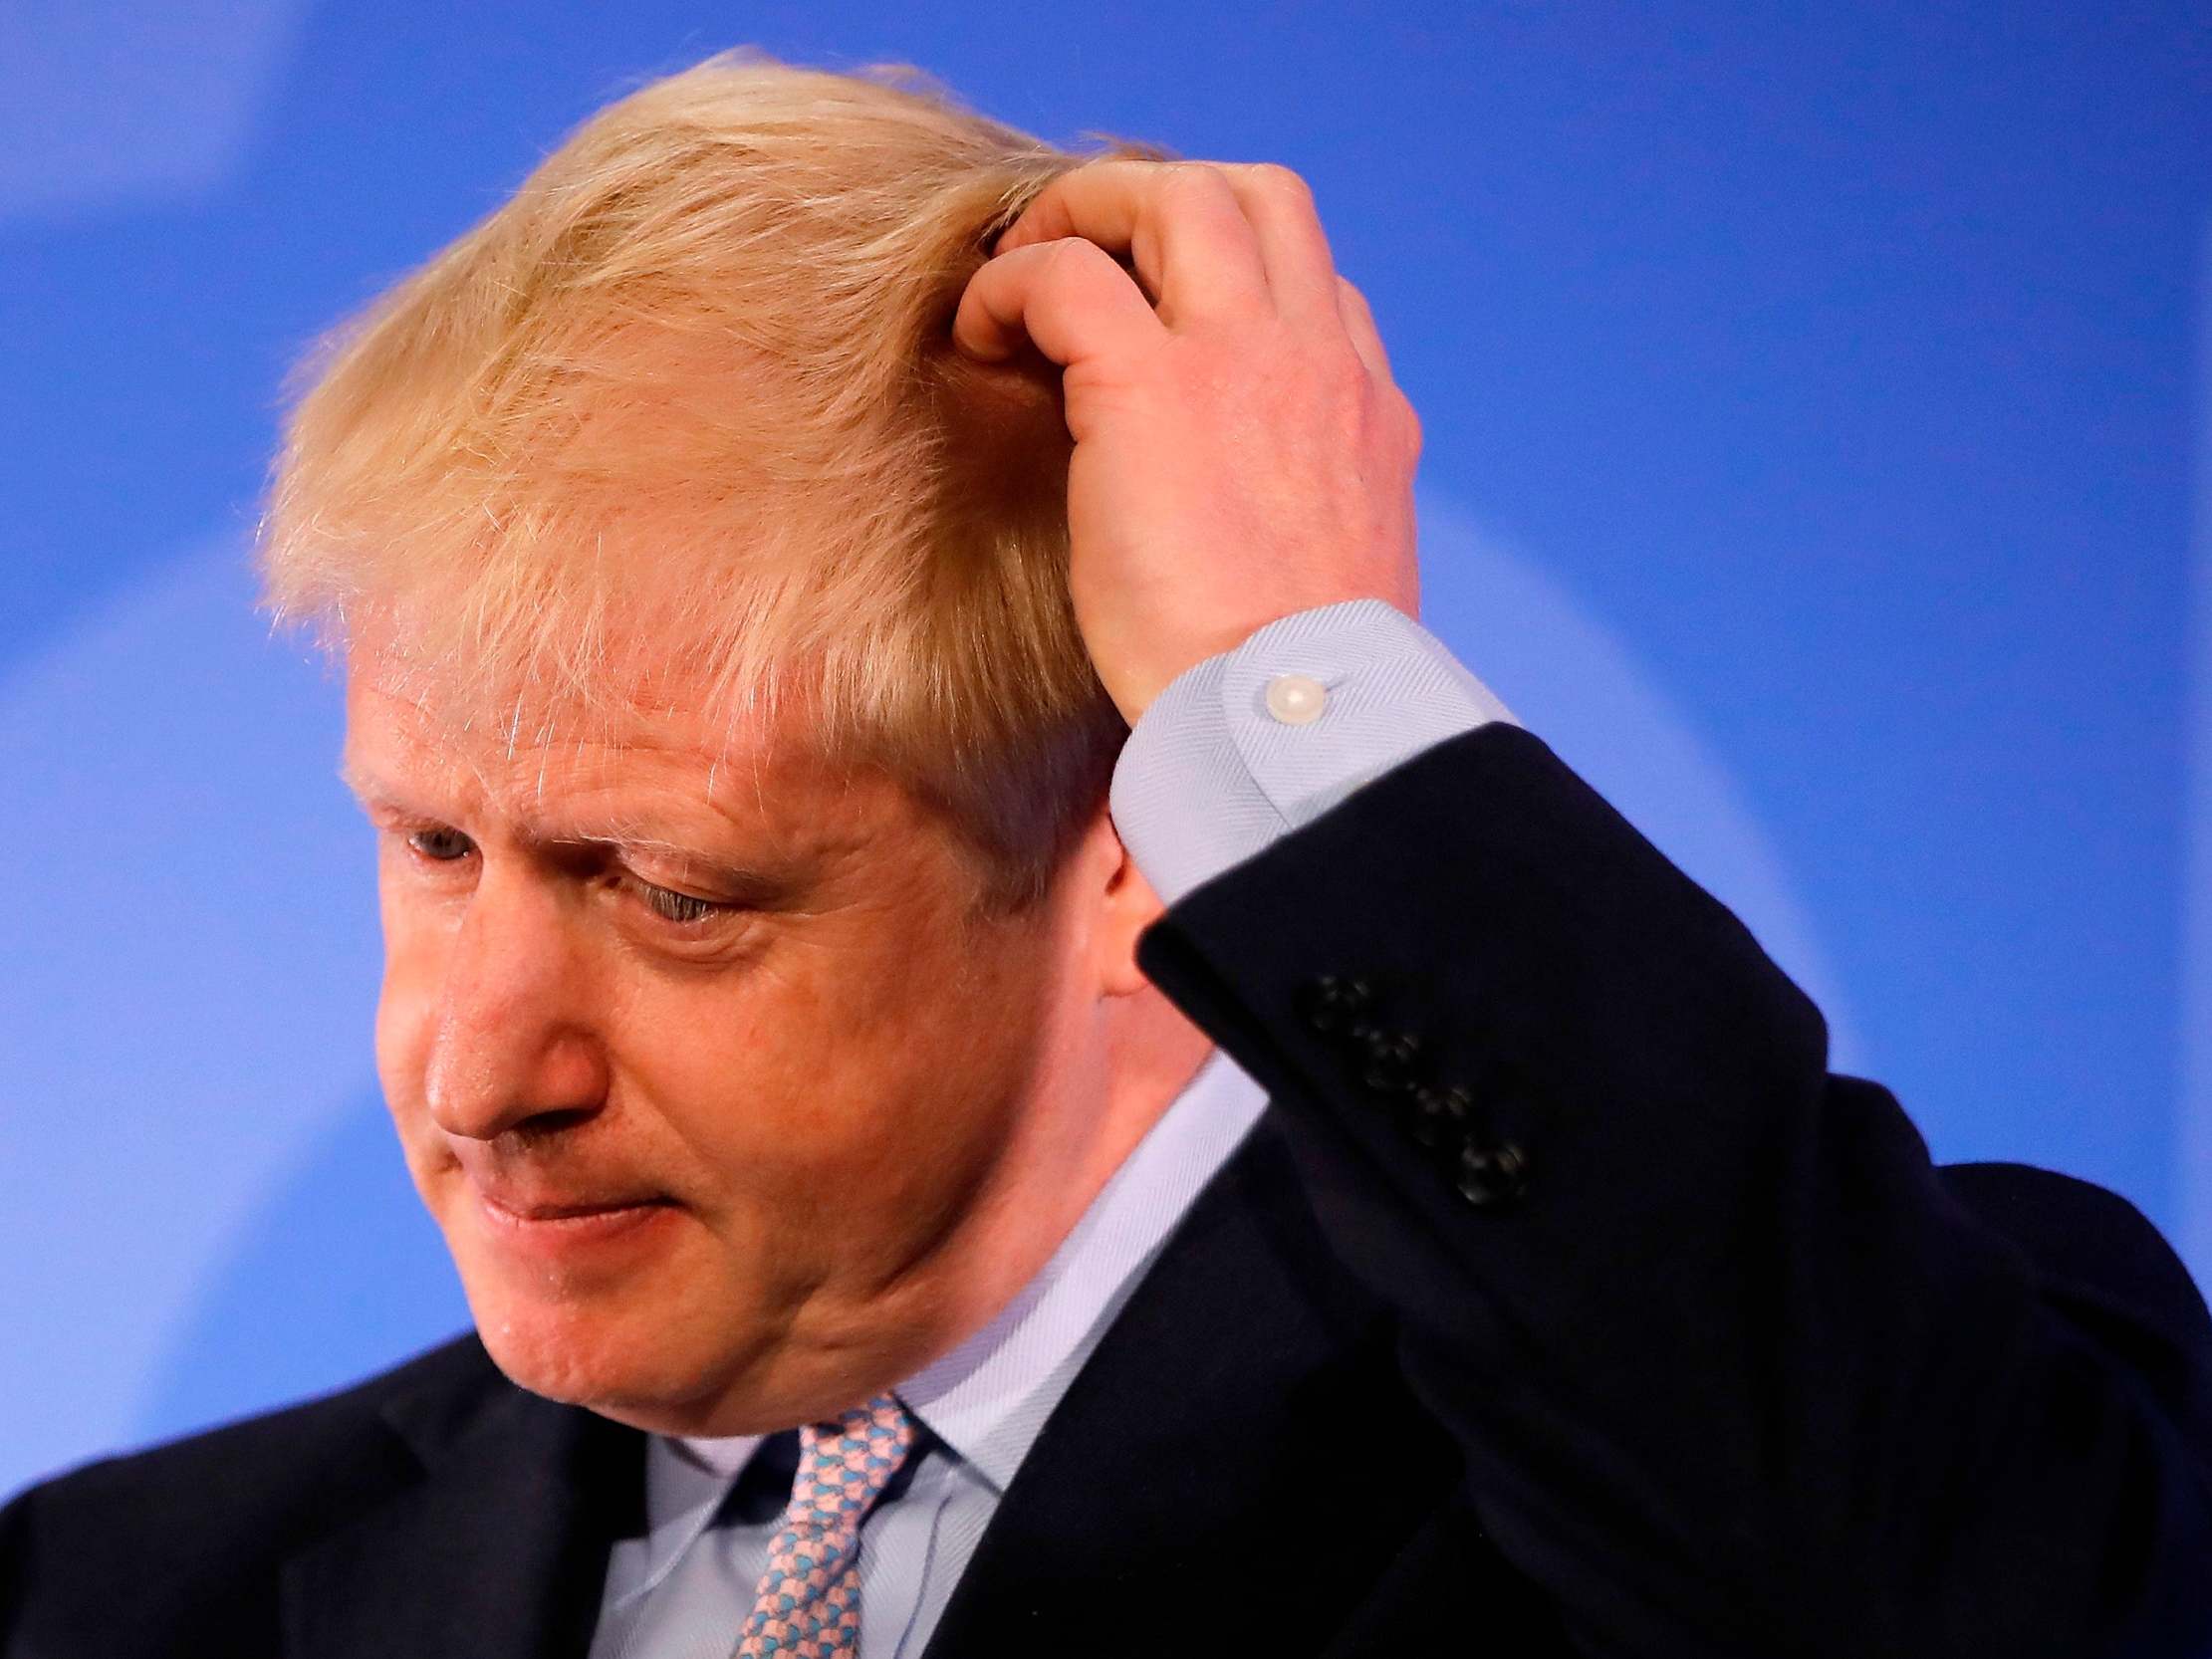 Conservative MP Boris Johnson takes a moment during his Conservative Party leadership campaign launch